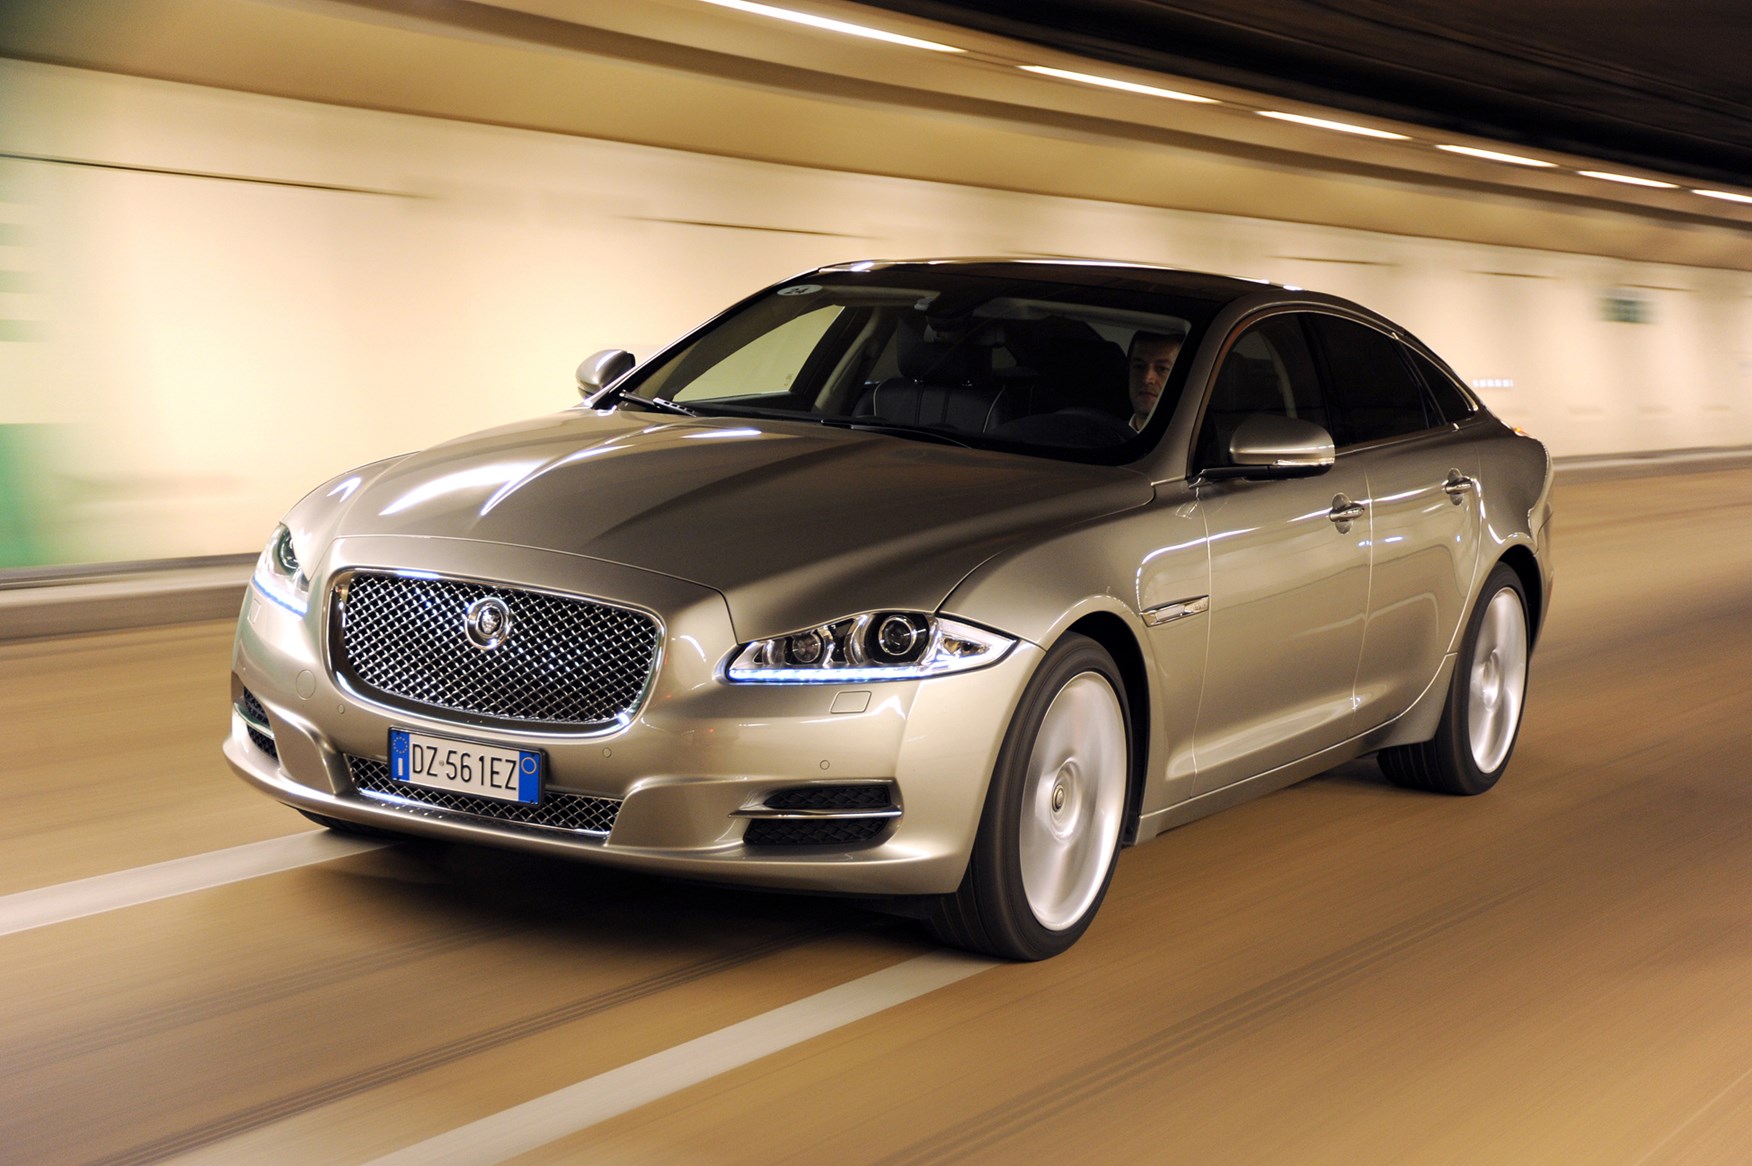 Jaguar XJ Saloon (2010 - 2019) running costs and reliability.